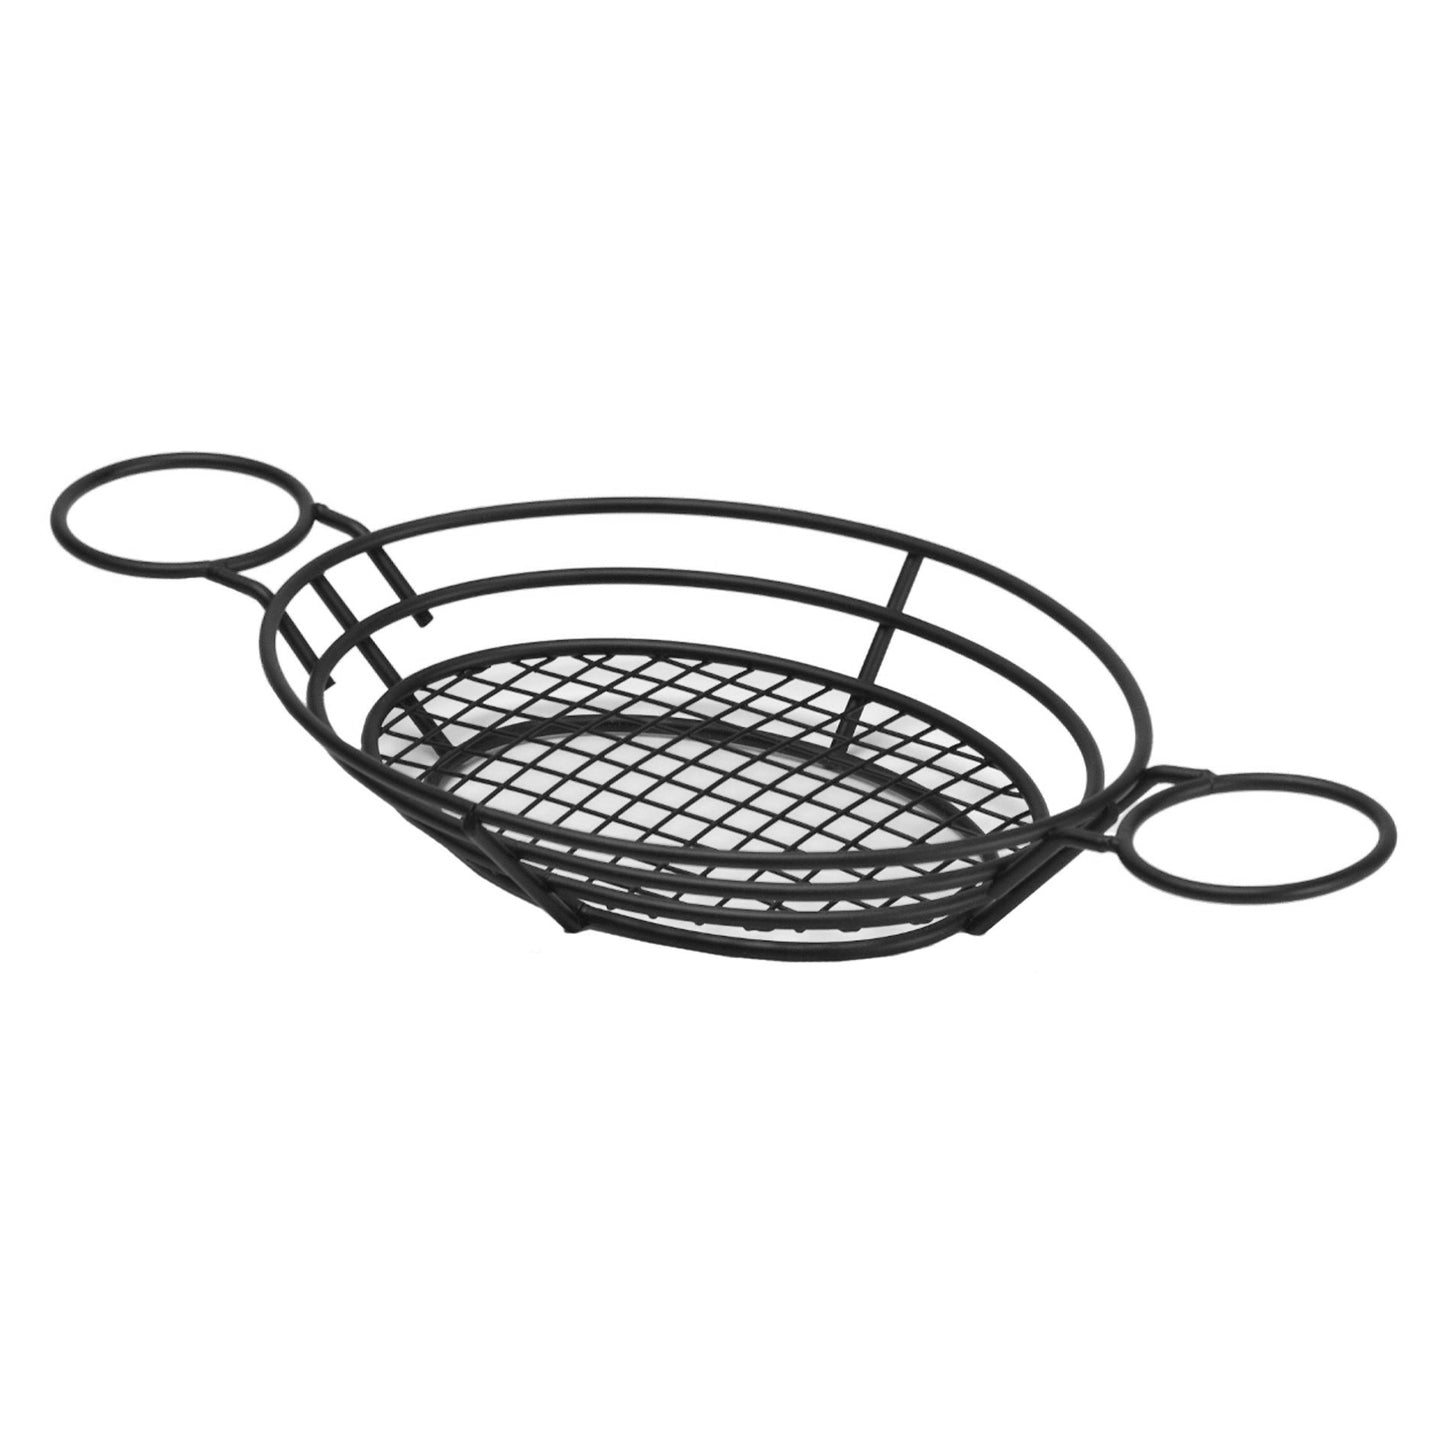 11" x 8" Oval Basket w/ Raised Grid Base and 2 Holders, 2" Tall (Fits 4-84100, 4-84111, 4-84105, RM-203, S-620, F-625, ER-025)